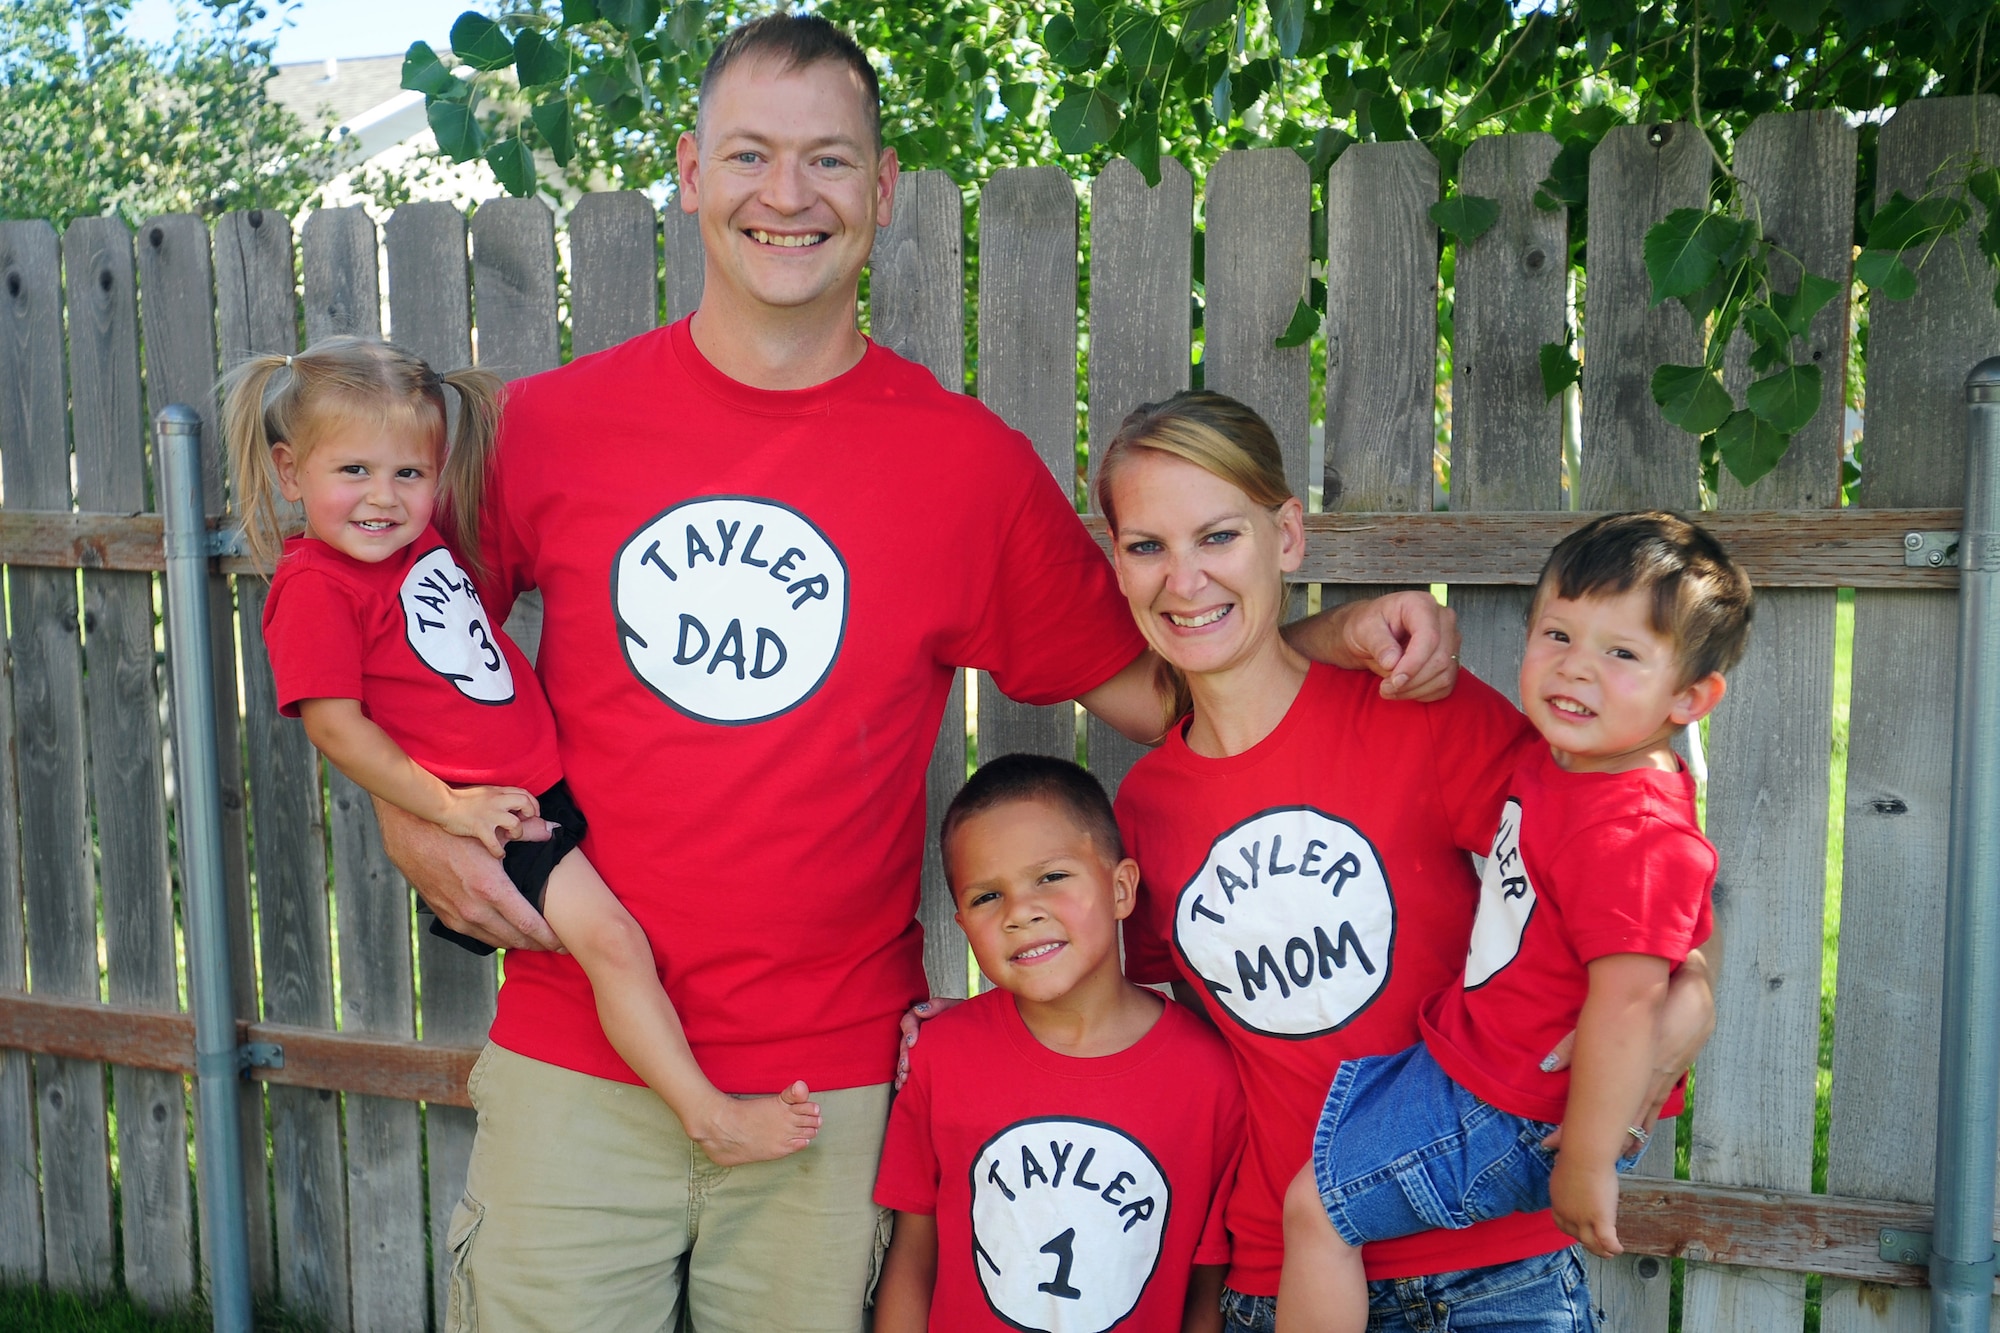 Master Sgt. Justin Tayler, 341st Missile Wing Staff Agency and Operations Group first sergeant; Lori Tayler, wife and mother; and their children pose at an adoption celebration in Great Falls, Mont., July 30, 2016. In total, the Tayler family has fostered 10 children and adopted three. (U.S. Air Force photo/2nd Lt. Annabel Monroe)